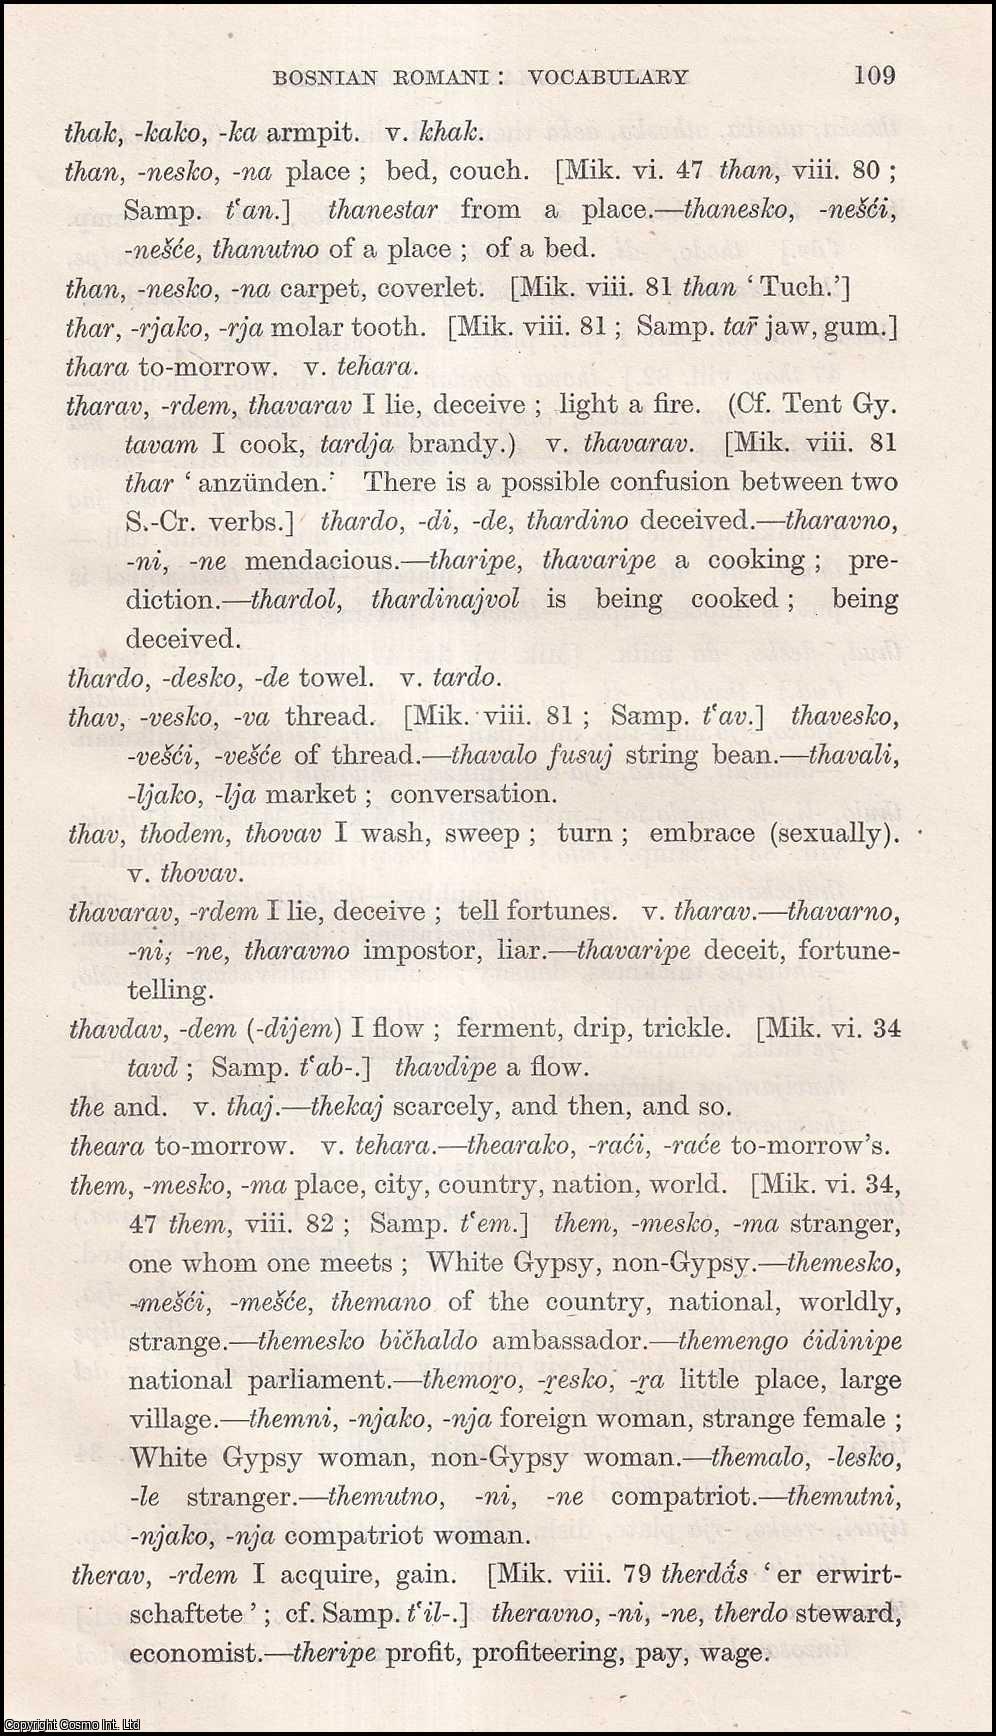 Rade Uhlik - Bosnian Romani: Vocabulary, T-Z. An uncommon original article from the Journal of the Gypsy Lore Society, 1943.